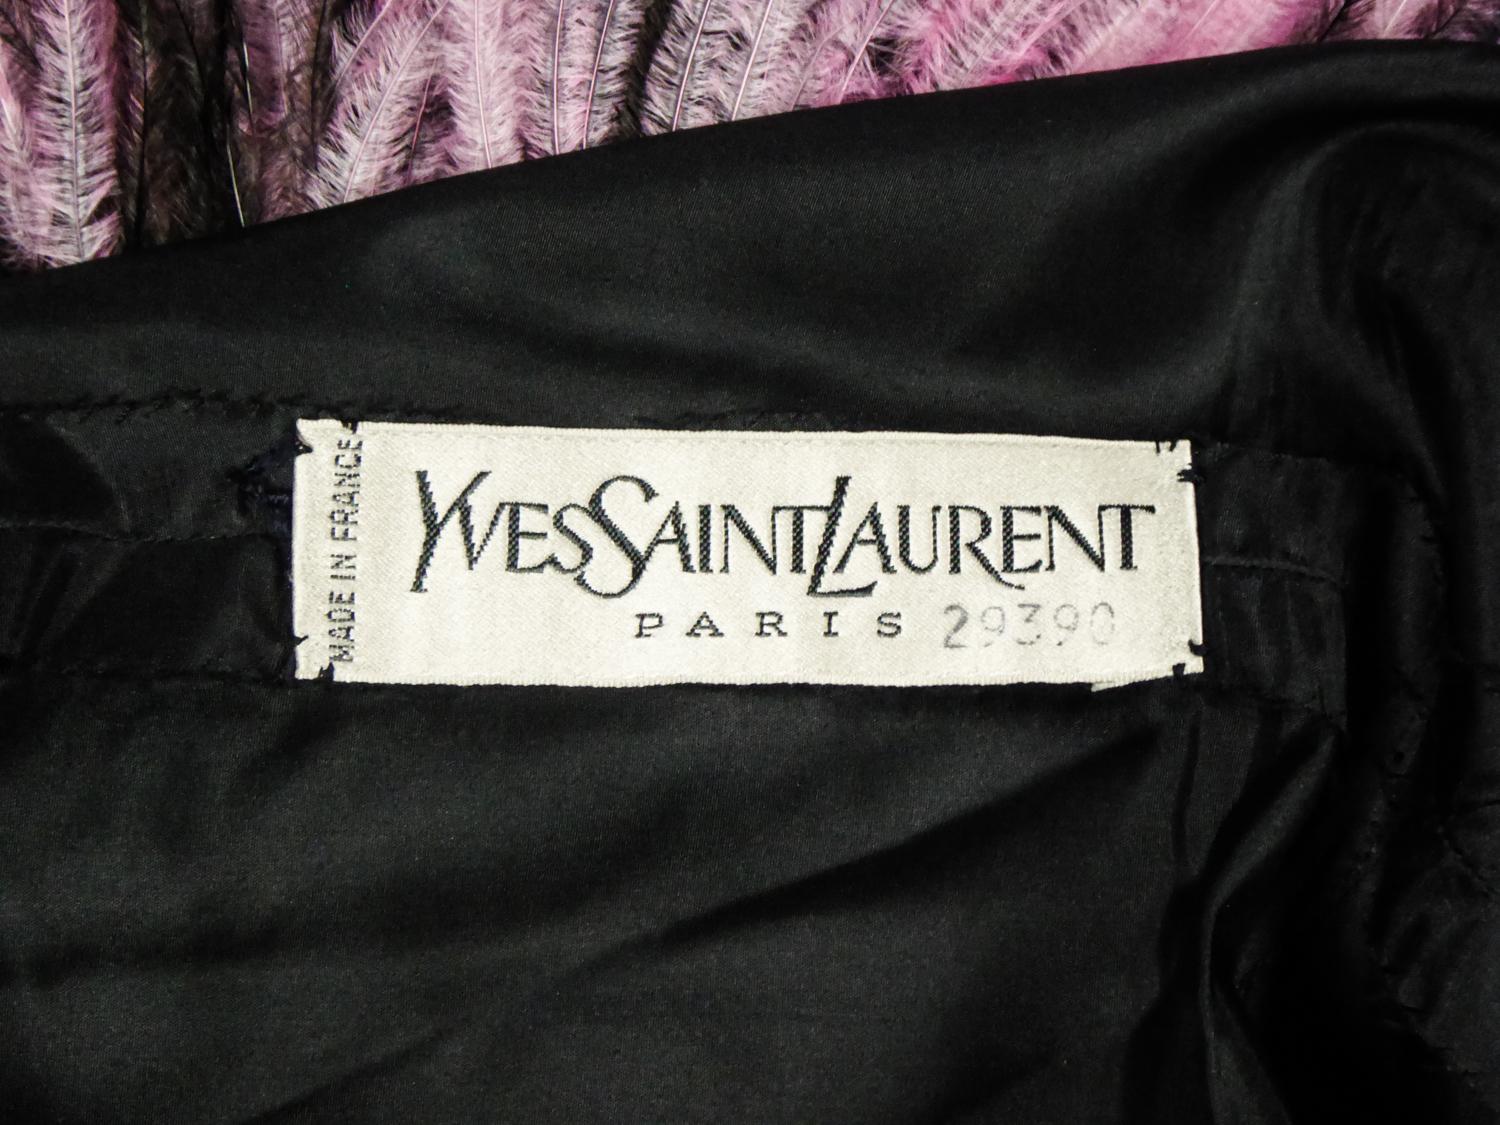 An Yves Saint Laurent Haute Couture Coat Dress Numbered 29390 Circa 1970/1980 For Sale 10